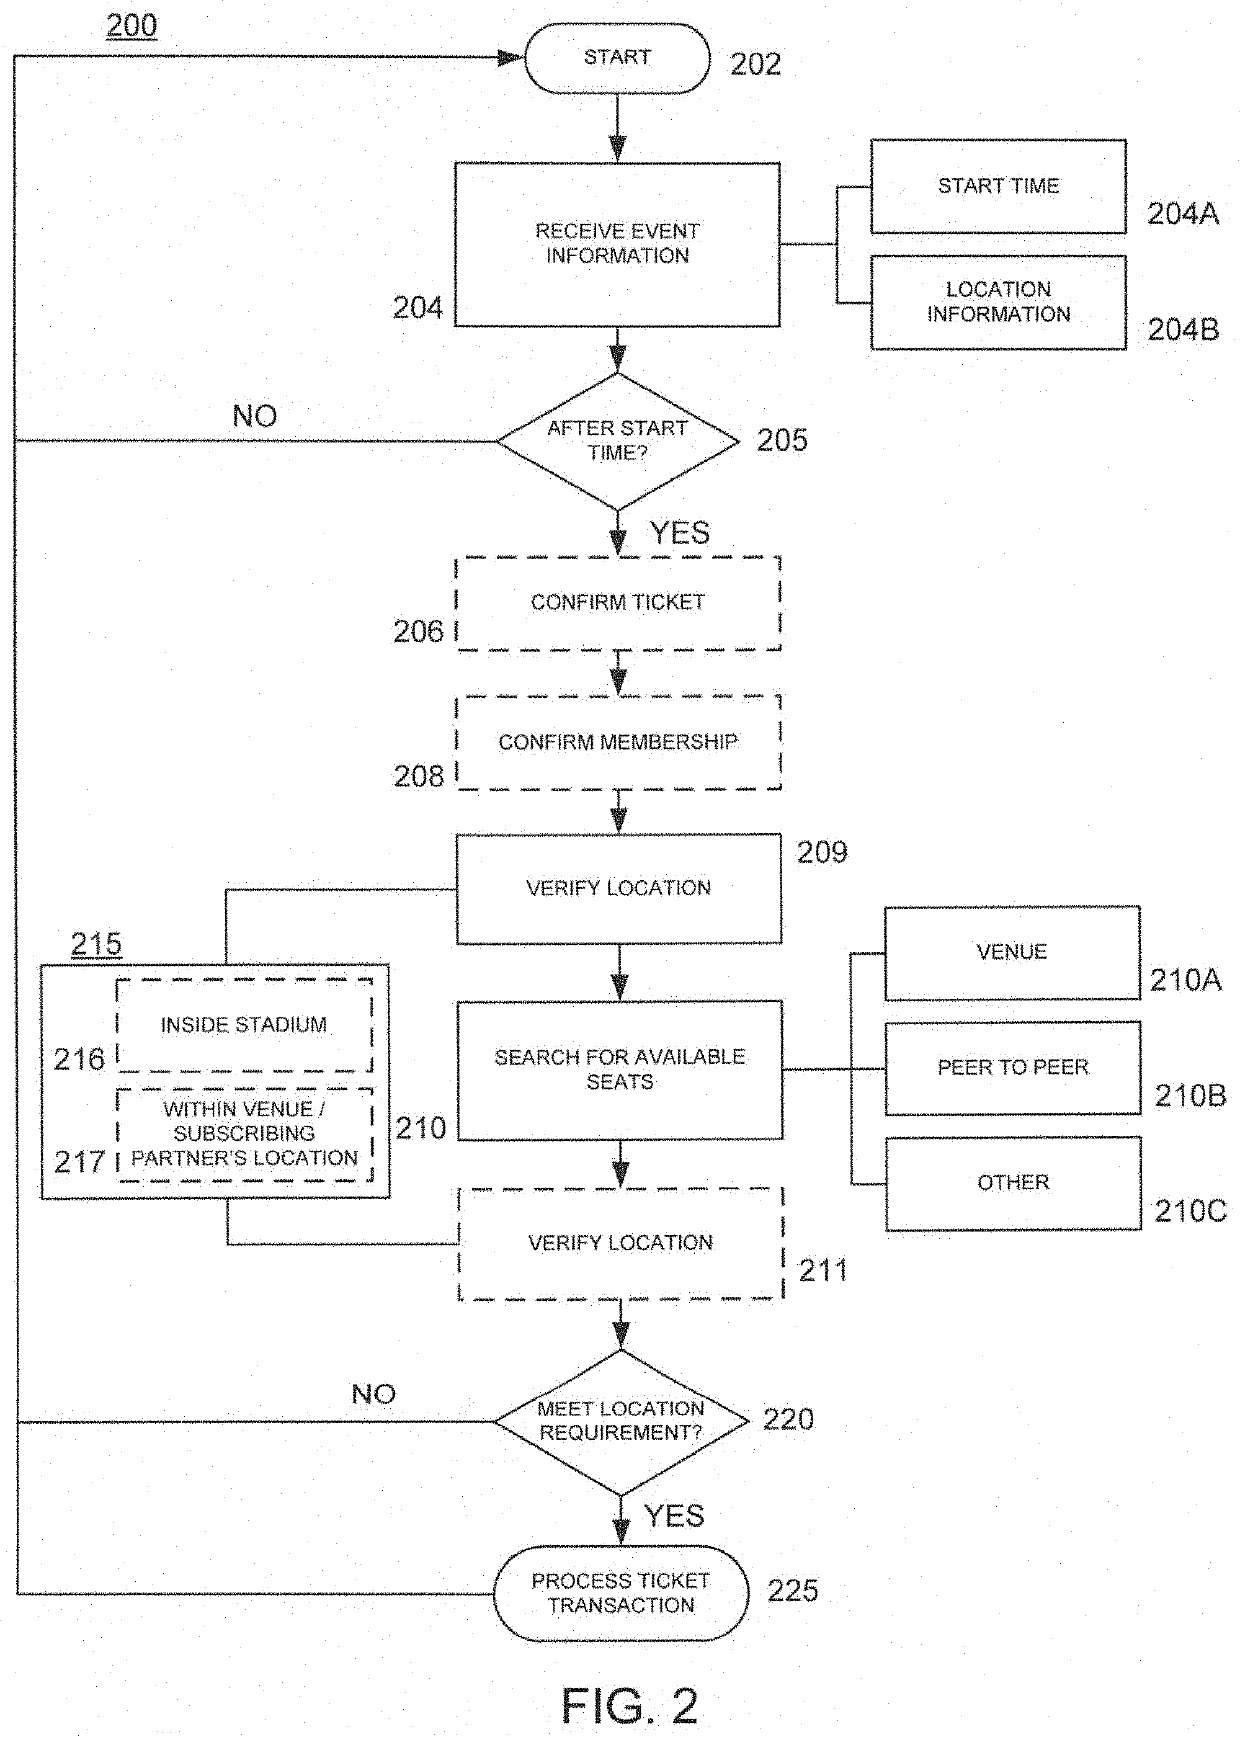 Venue management system for during event peer-to-peer ticket exchange